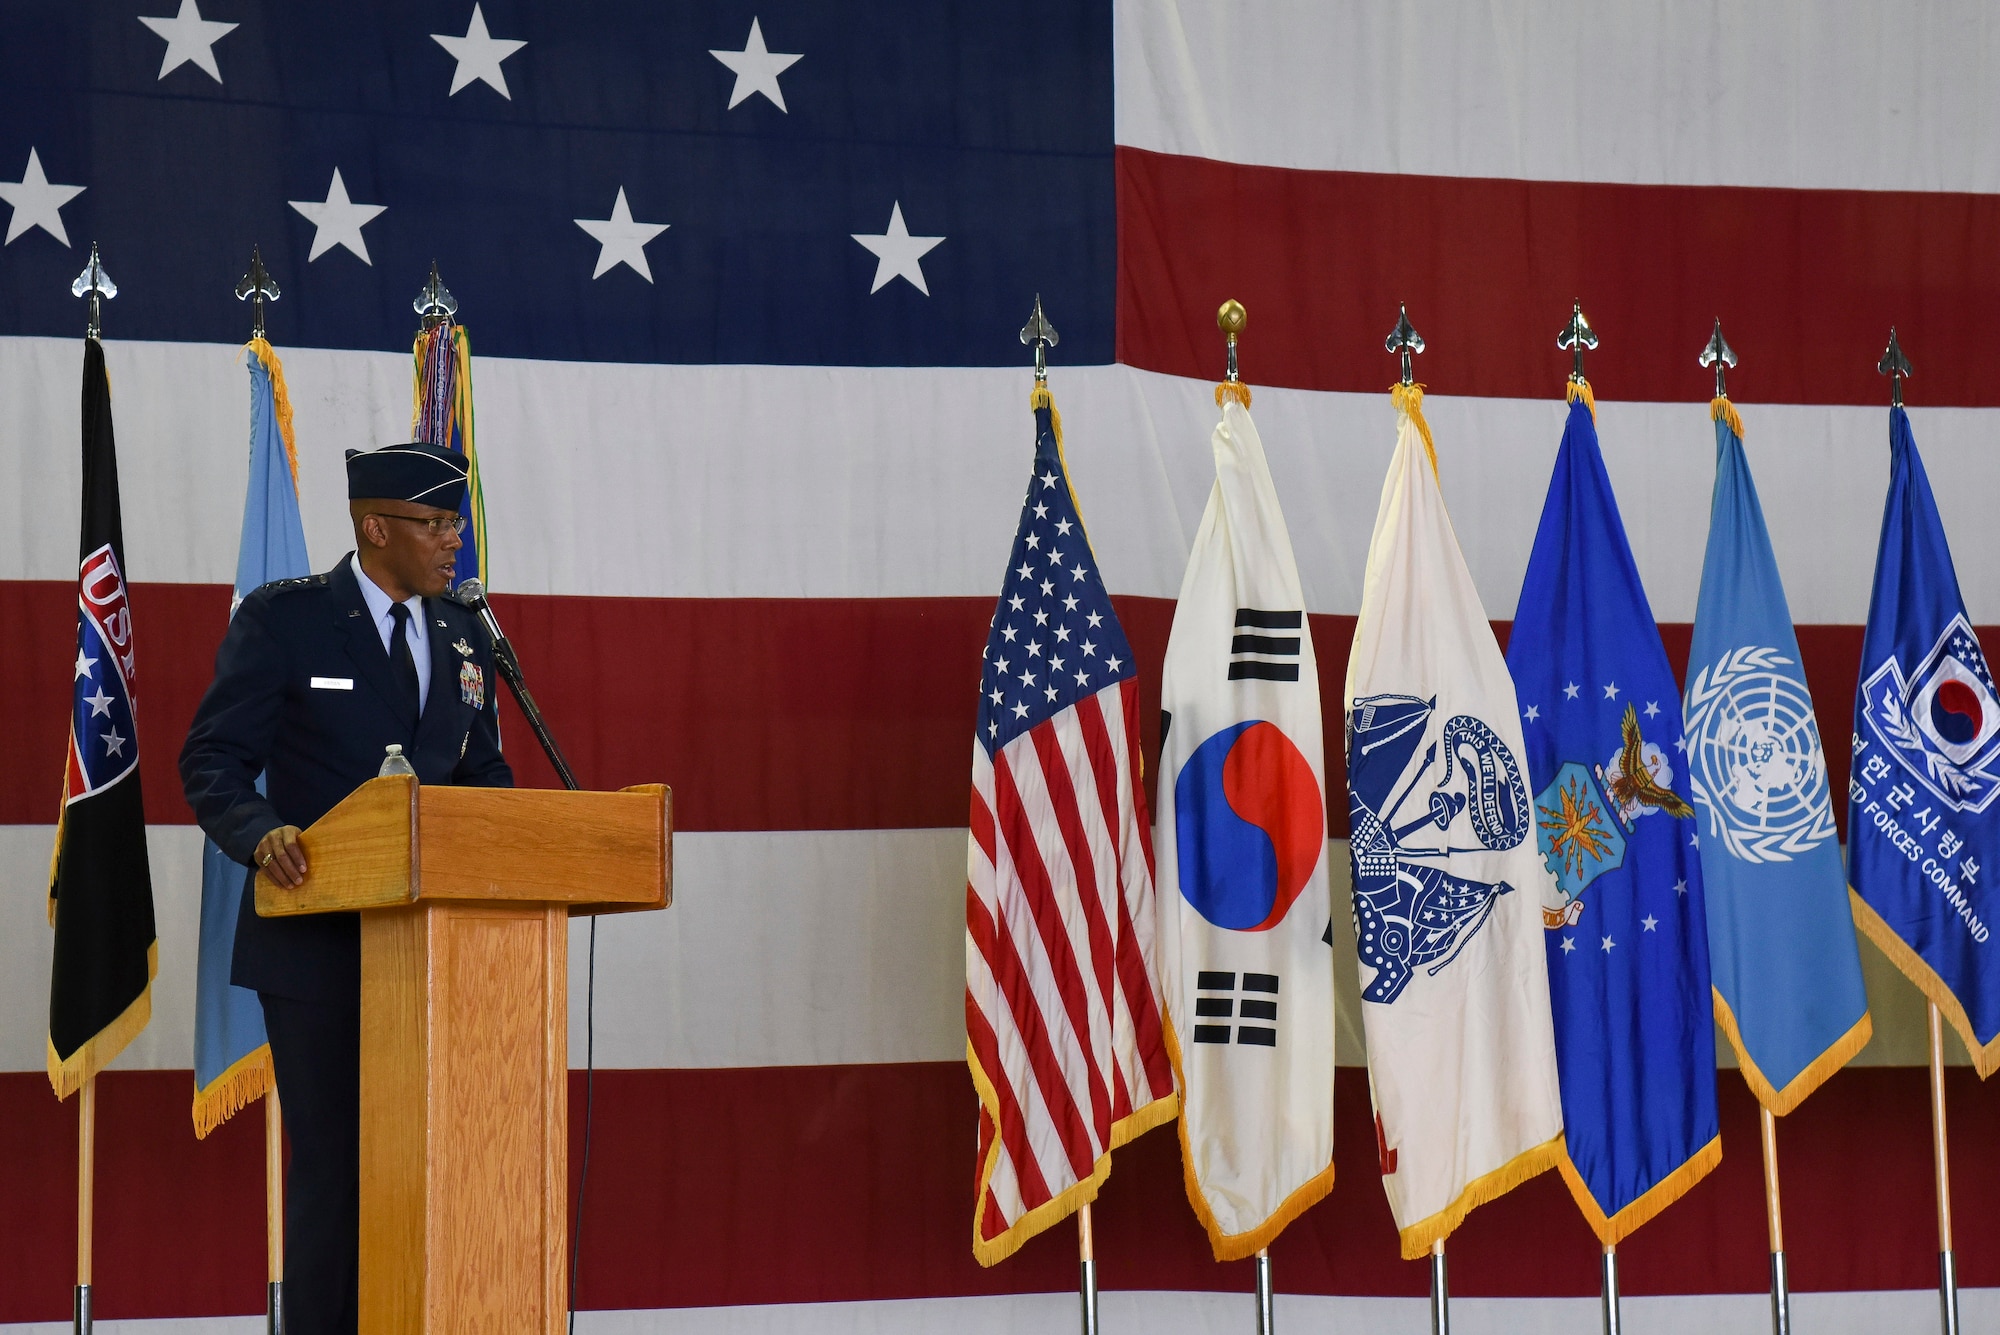 Gen. CQ Brown, Jr., Commander, Pacific Air Forces, gives his opening remarks during the Seventh Air Force Change of Command Ceremony at Osan Air Base, Republic of Korea Aug. 27, 2018. During the ceremony Brown bid farewell to Lt. Gen. Thomas W. Bergeson and welcomed Lt. Gen. Kenneth S. Wilsbach to the ROK.  (U.S. Photo by Senior Airman Savannah L. Waters)